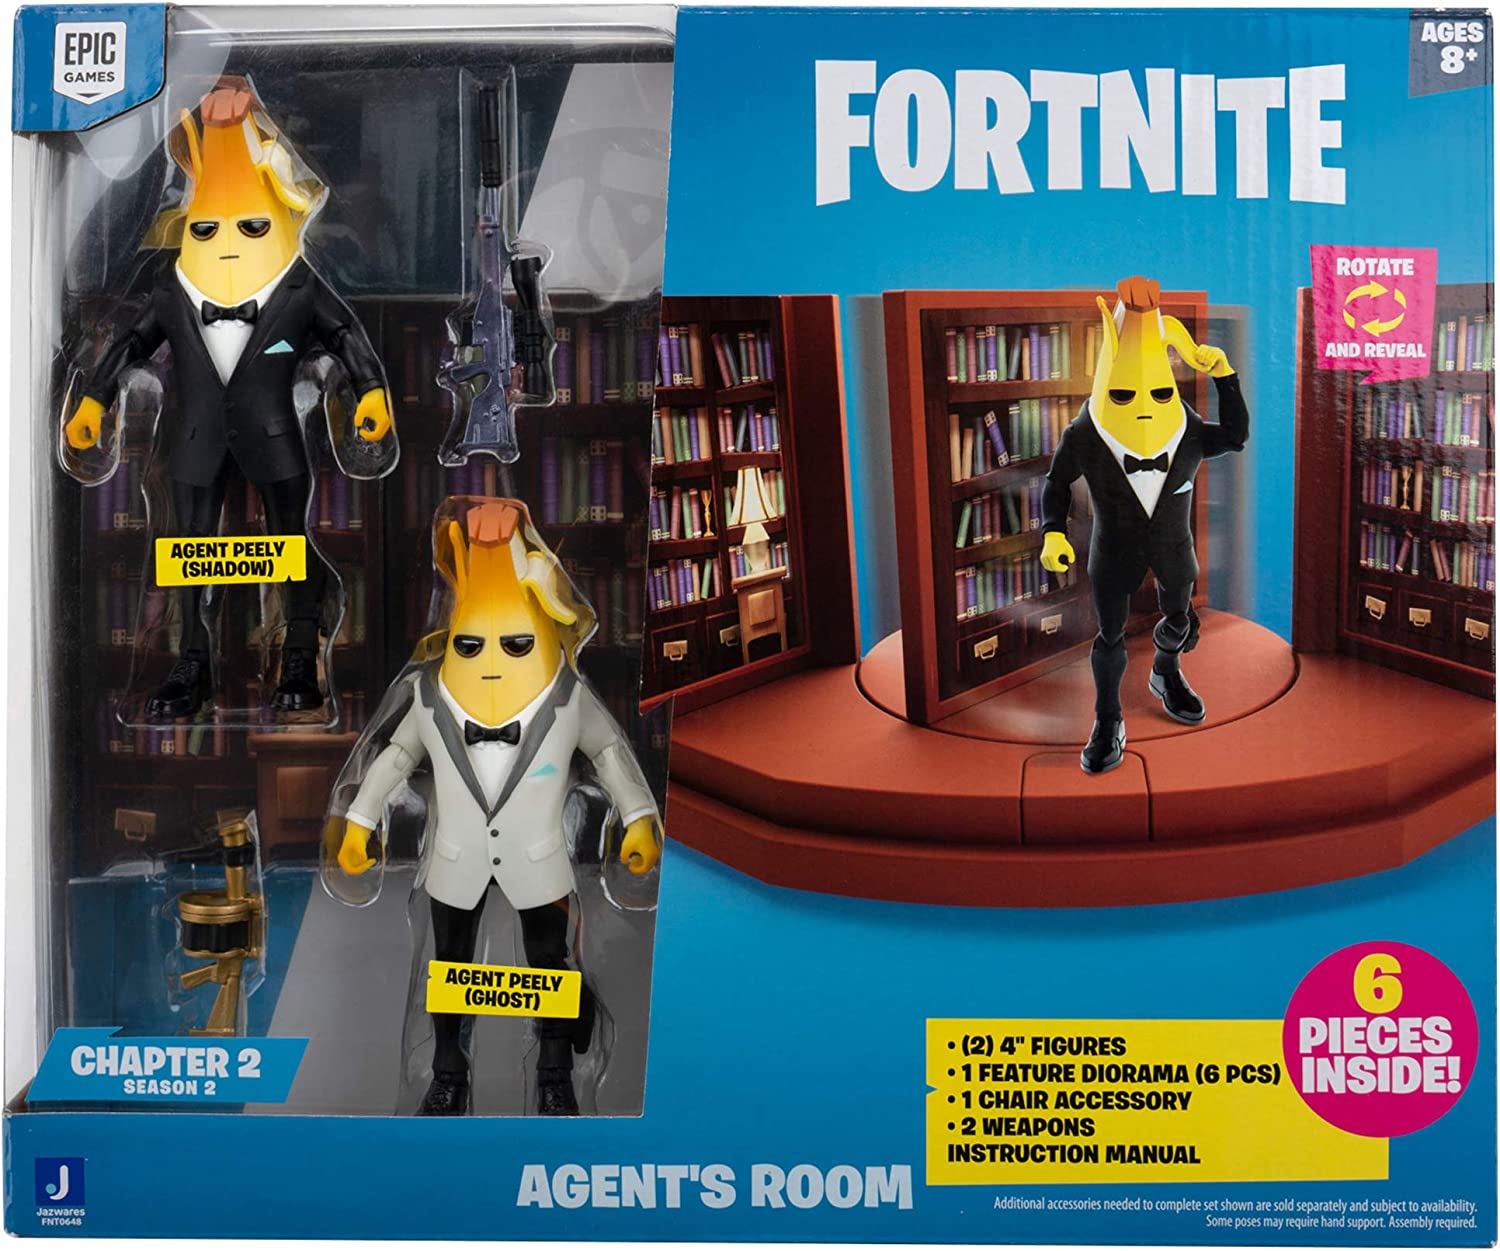 Fortnite Agents Room Playset: includes 2 (4-inch) Articulated Agent Pe